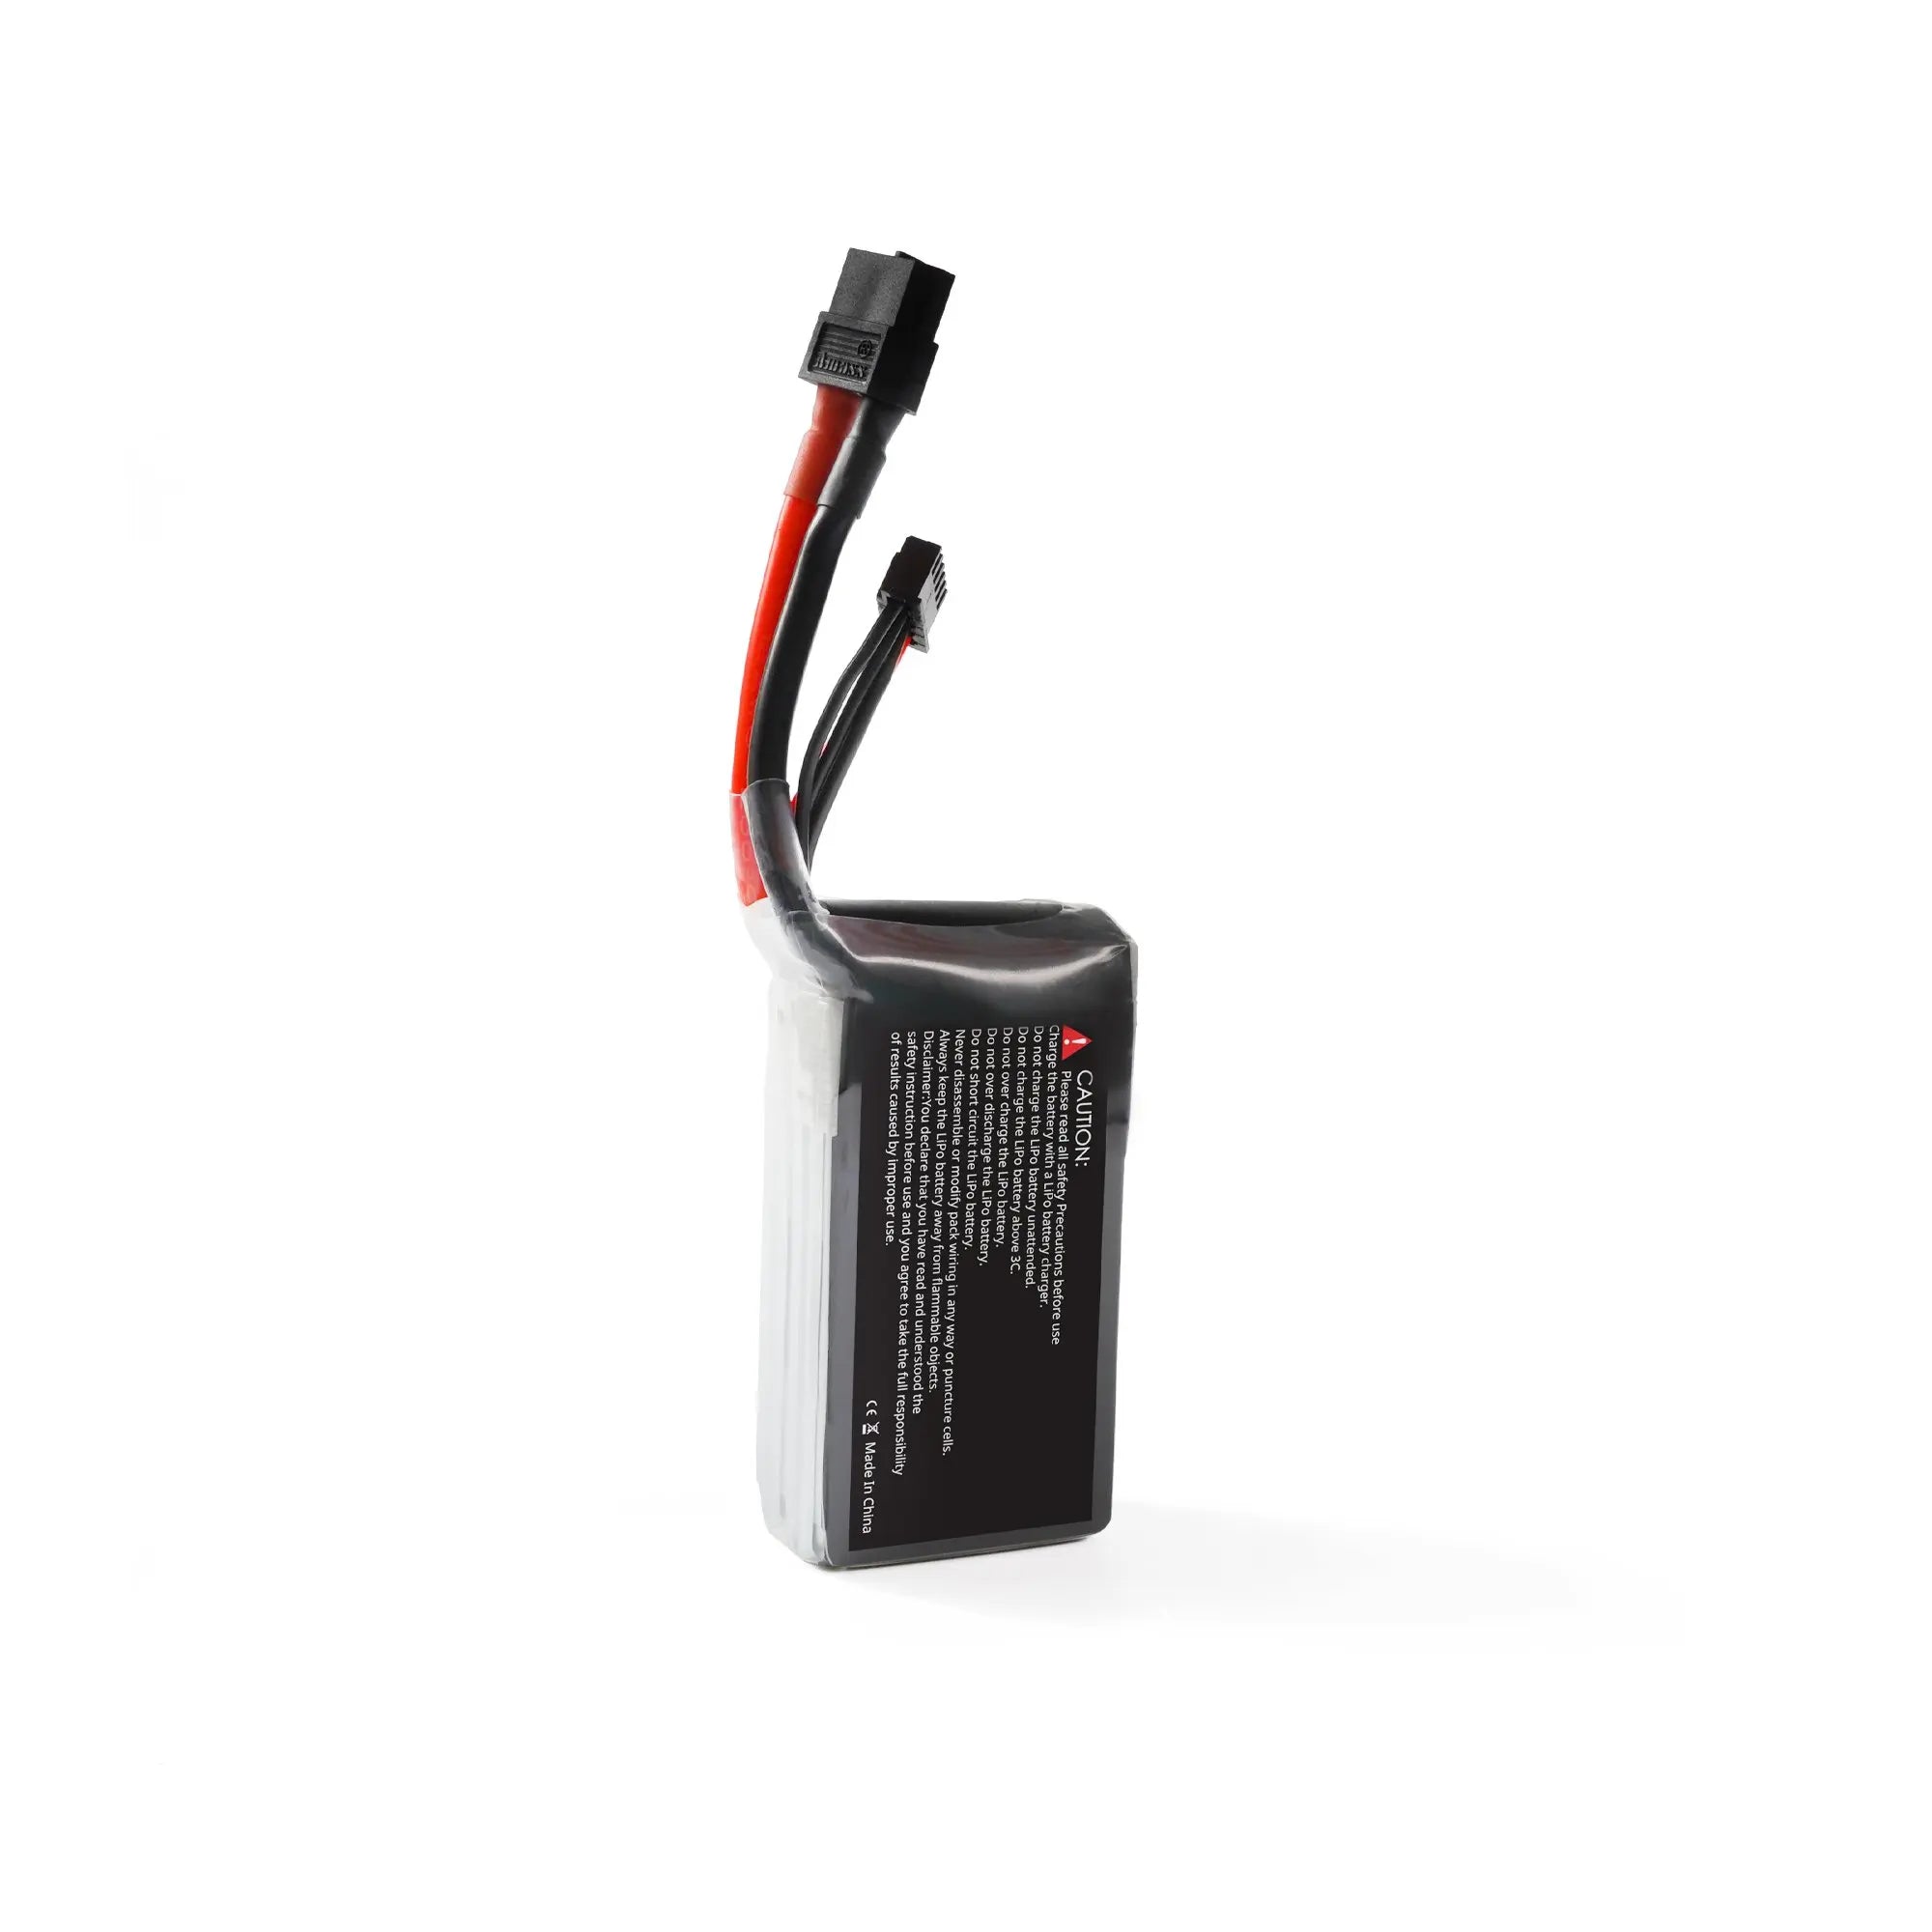 GEPRC Storm 4S 1400mAh 120C Lipo Battery, Q: What is the appropriate charging rate C for the battery